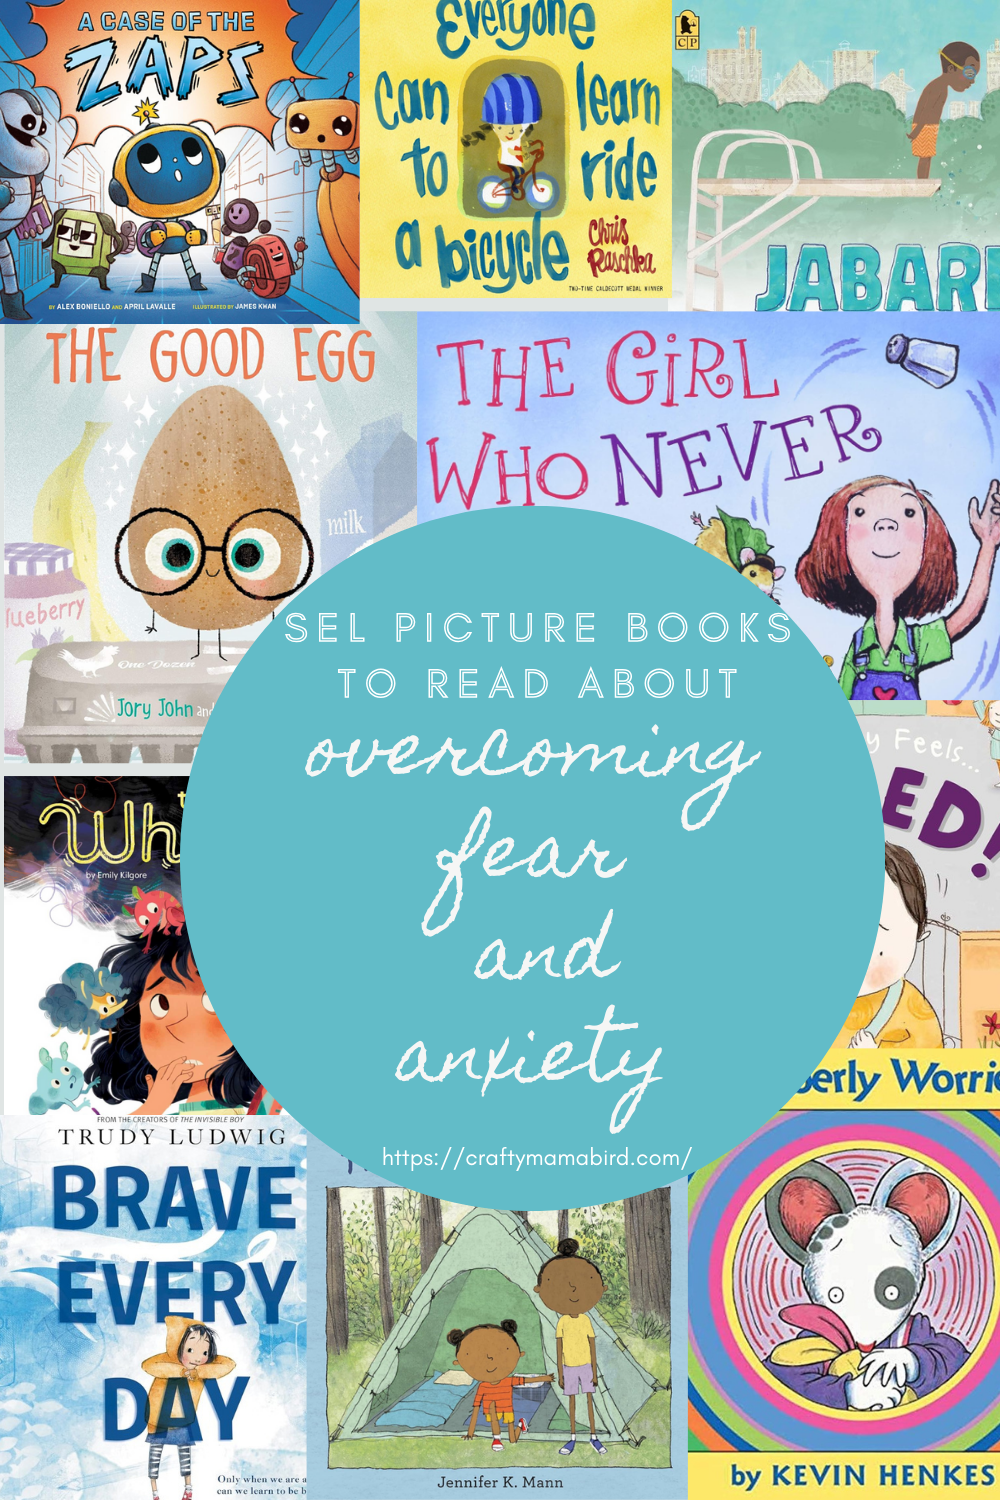 SEL picture books to read about overcoming Anxiety and Fear